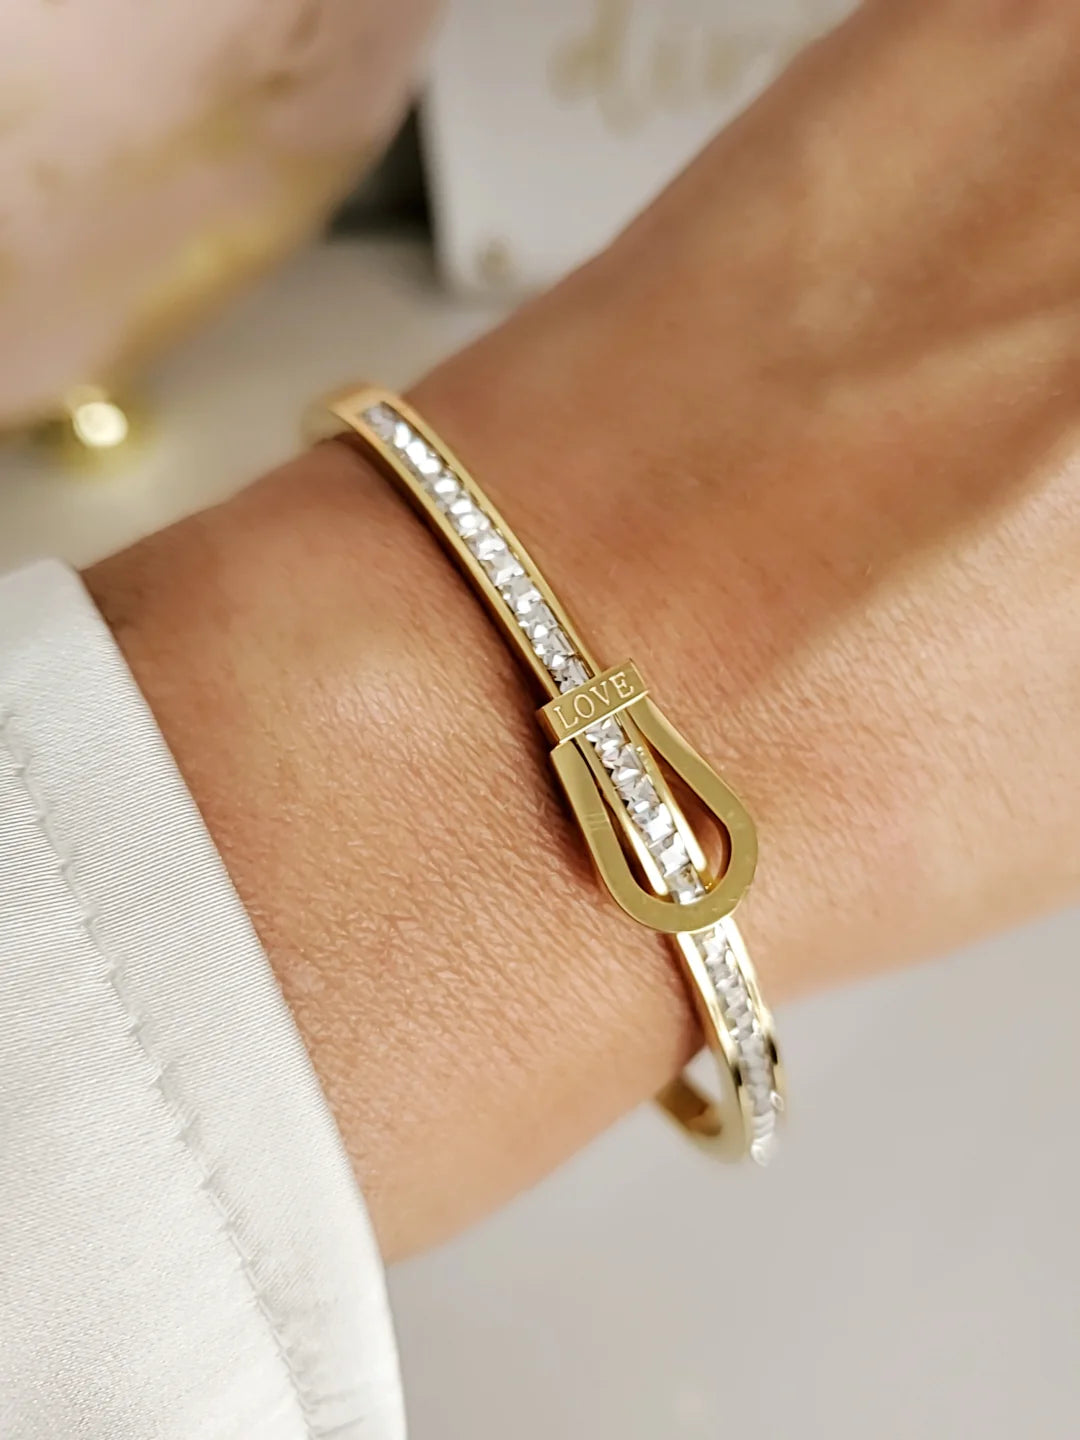 "Shimmering Gold Belt Bangle: Upgrade Your Look to Glamorous!"